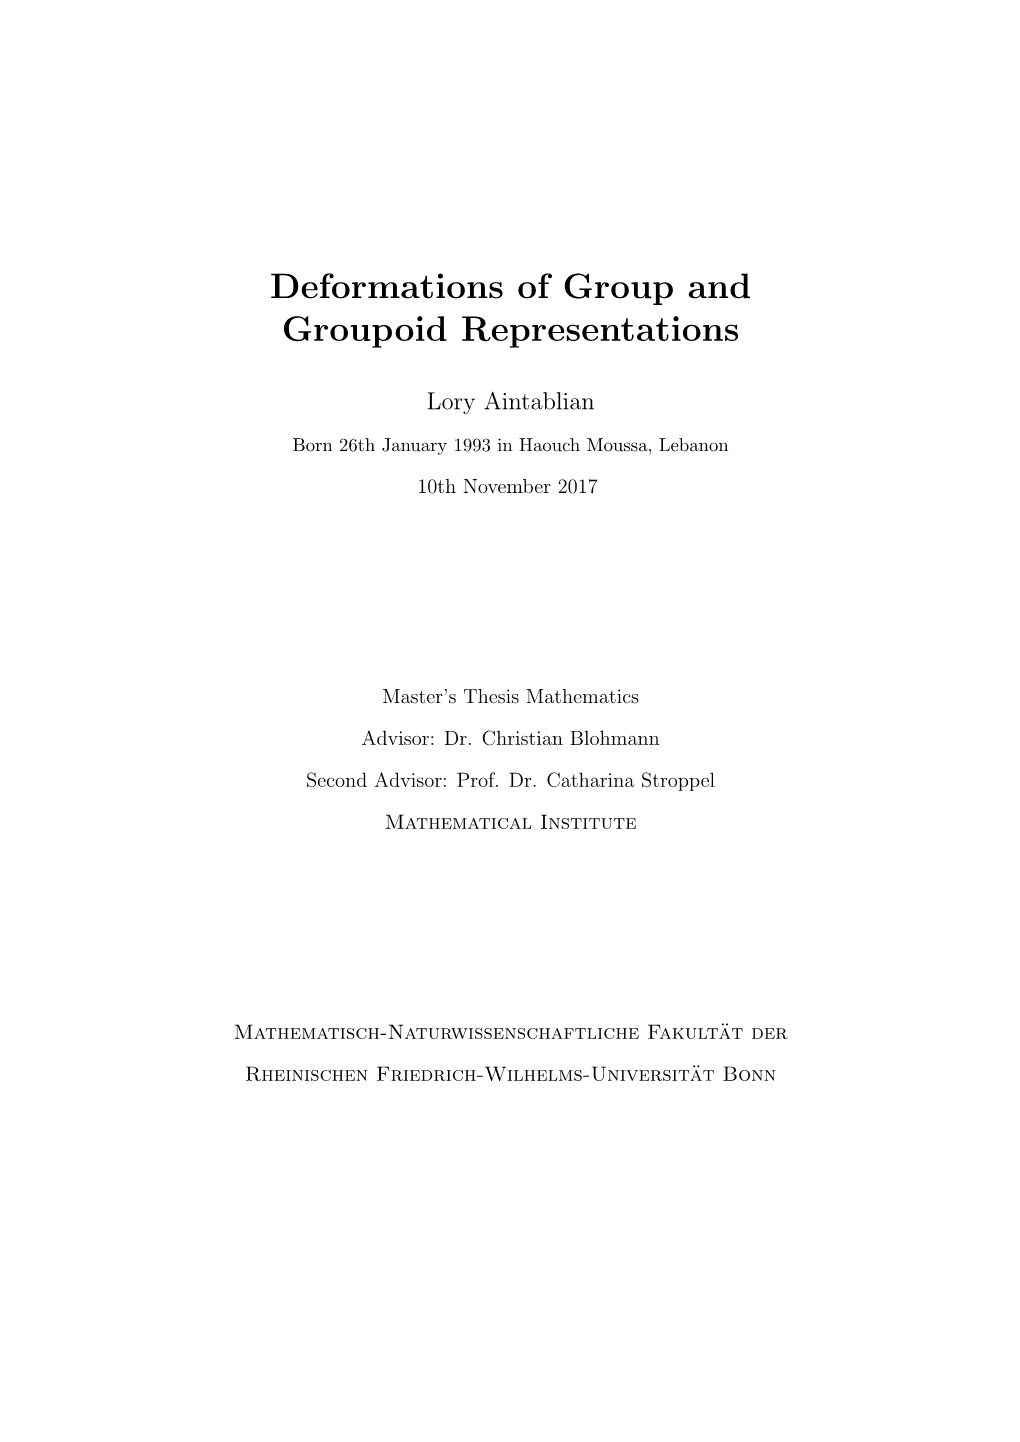 Deformations of Group and Groupoid Representations